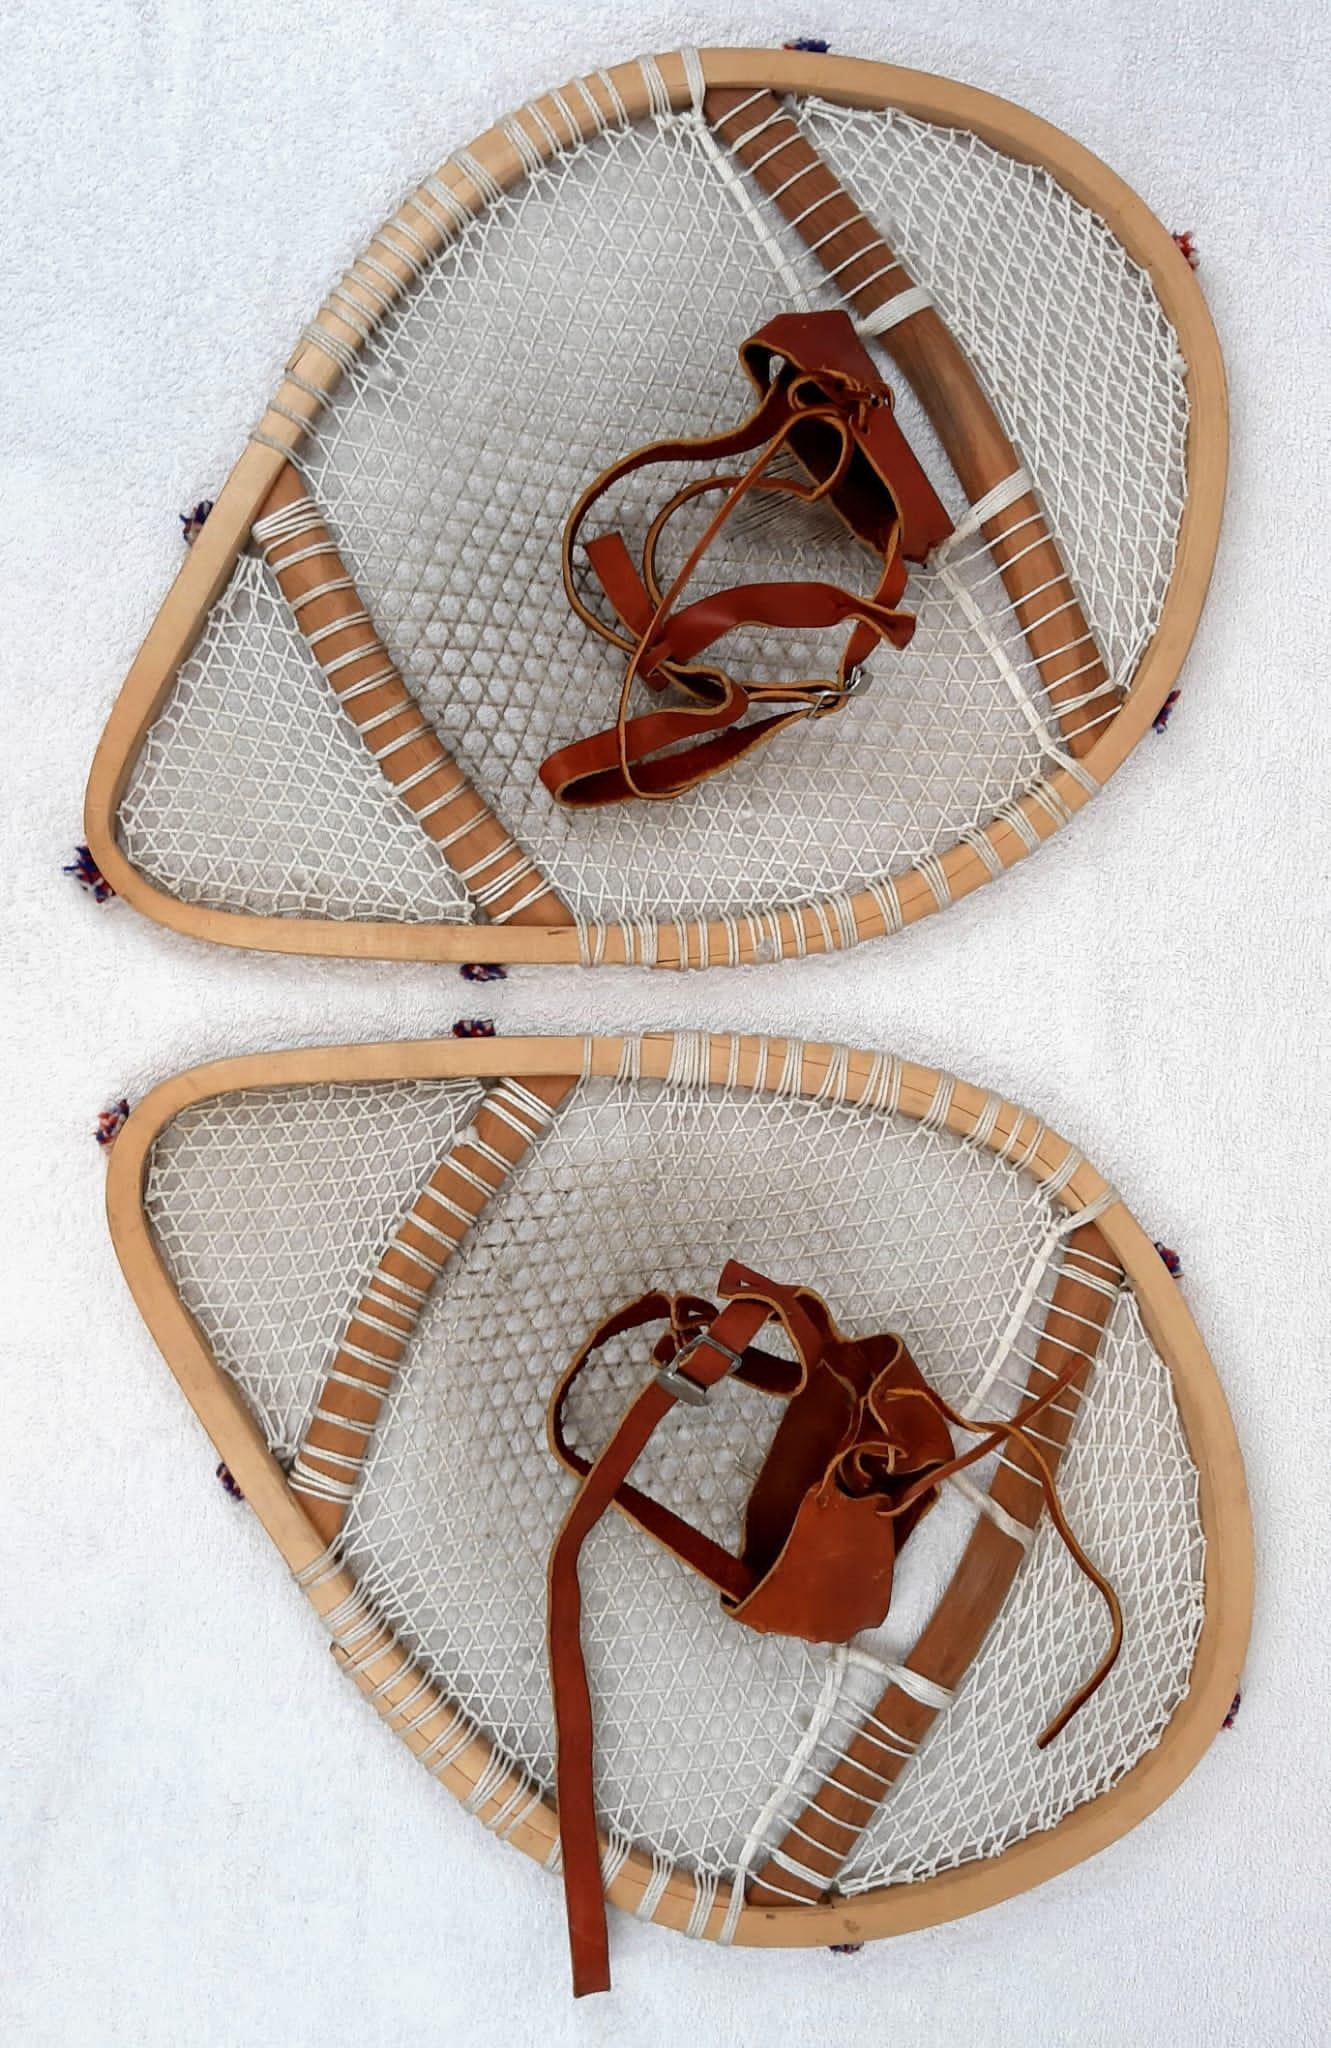 A Pair of Vintage Hand-Crafted Innuit Snowshoes from Newfoundland and Labrador. 58 x 40cm.